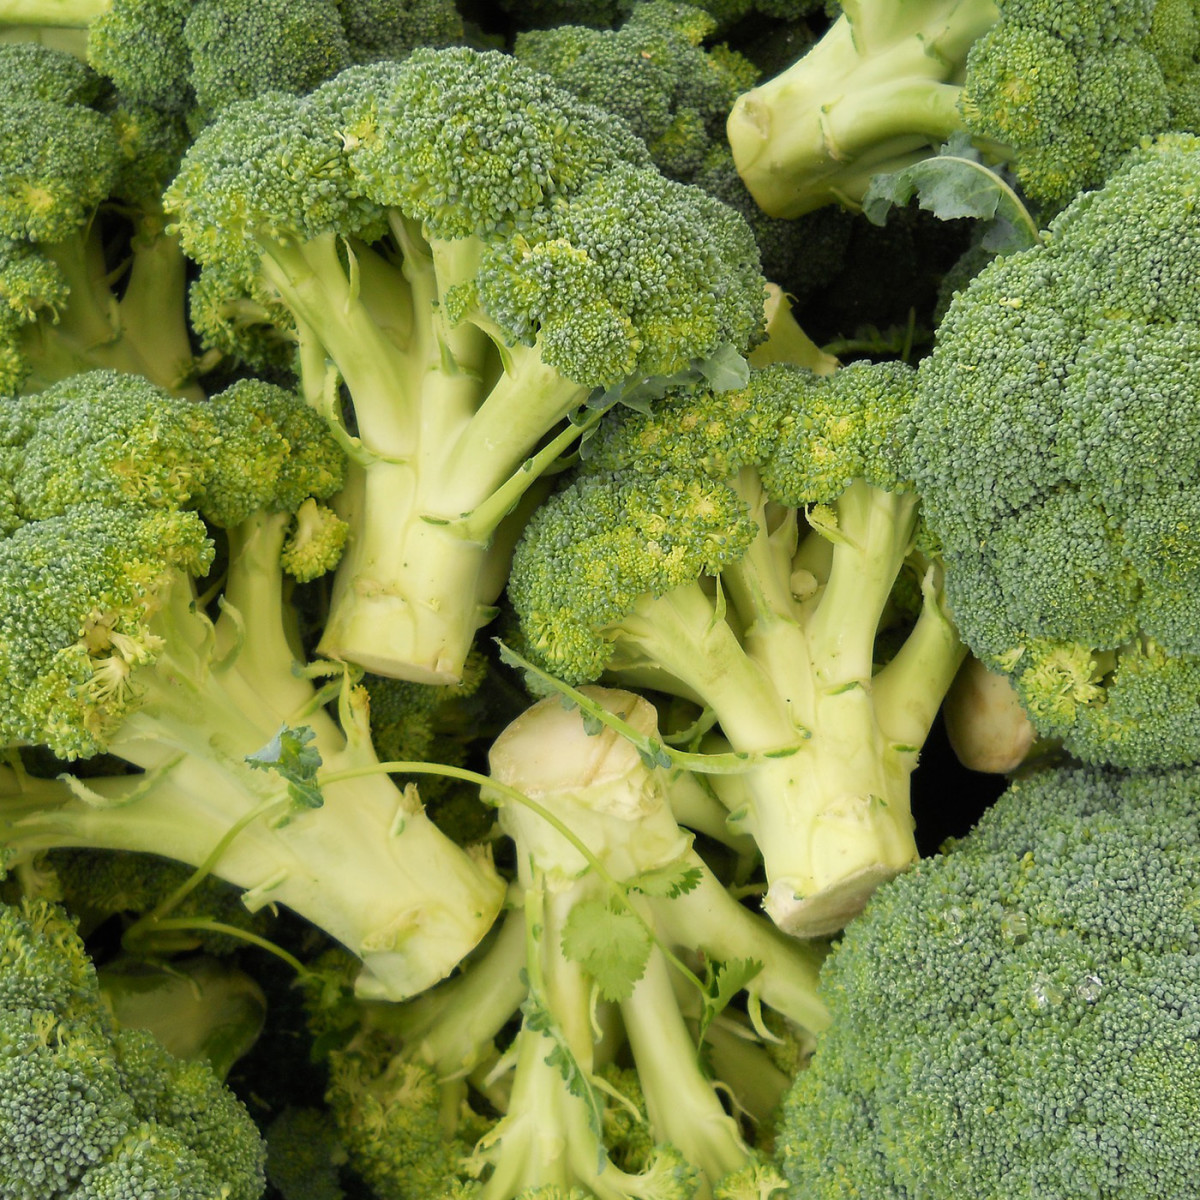 Broccoli is often considered a super-food because it is so nutritious.